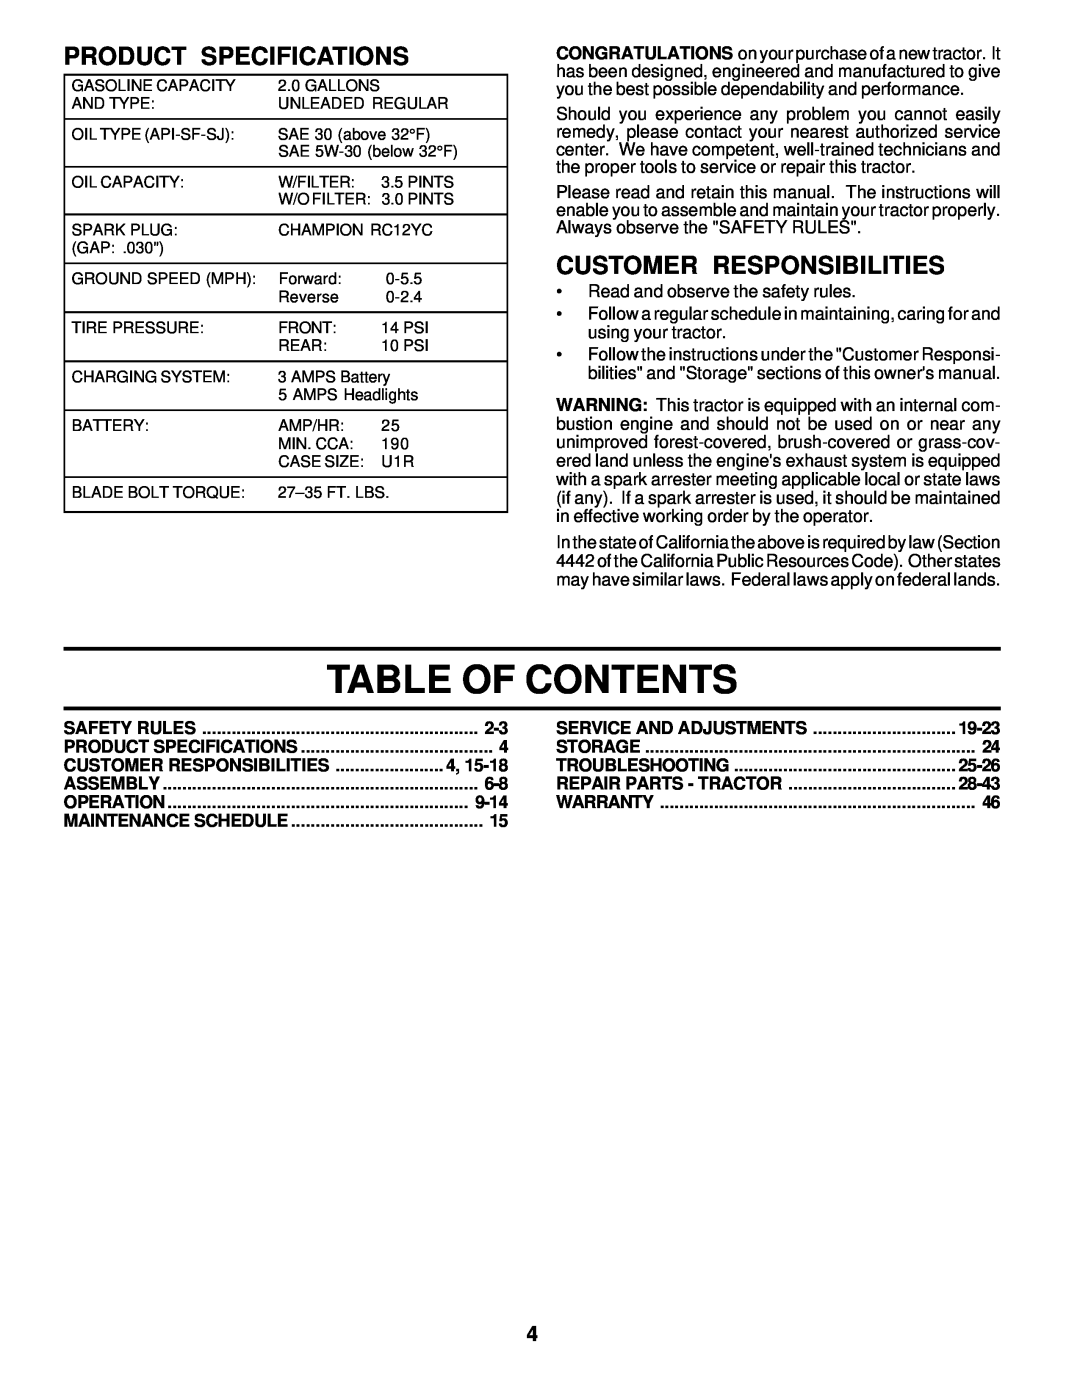 Poulan PR17H42STC, 178219 owner manual Table Of Contents, Product Specifications, Customer Responsibilities 